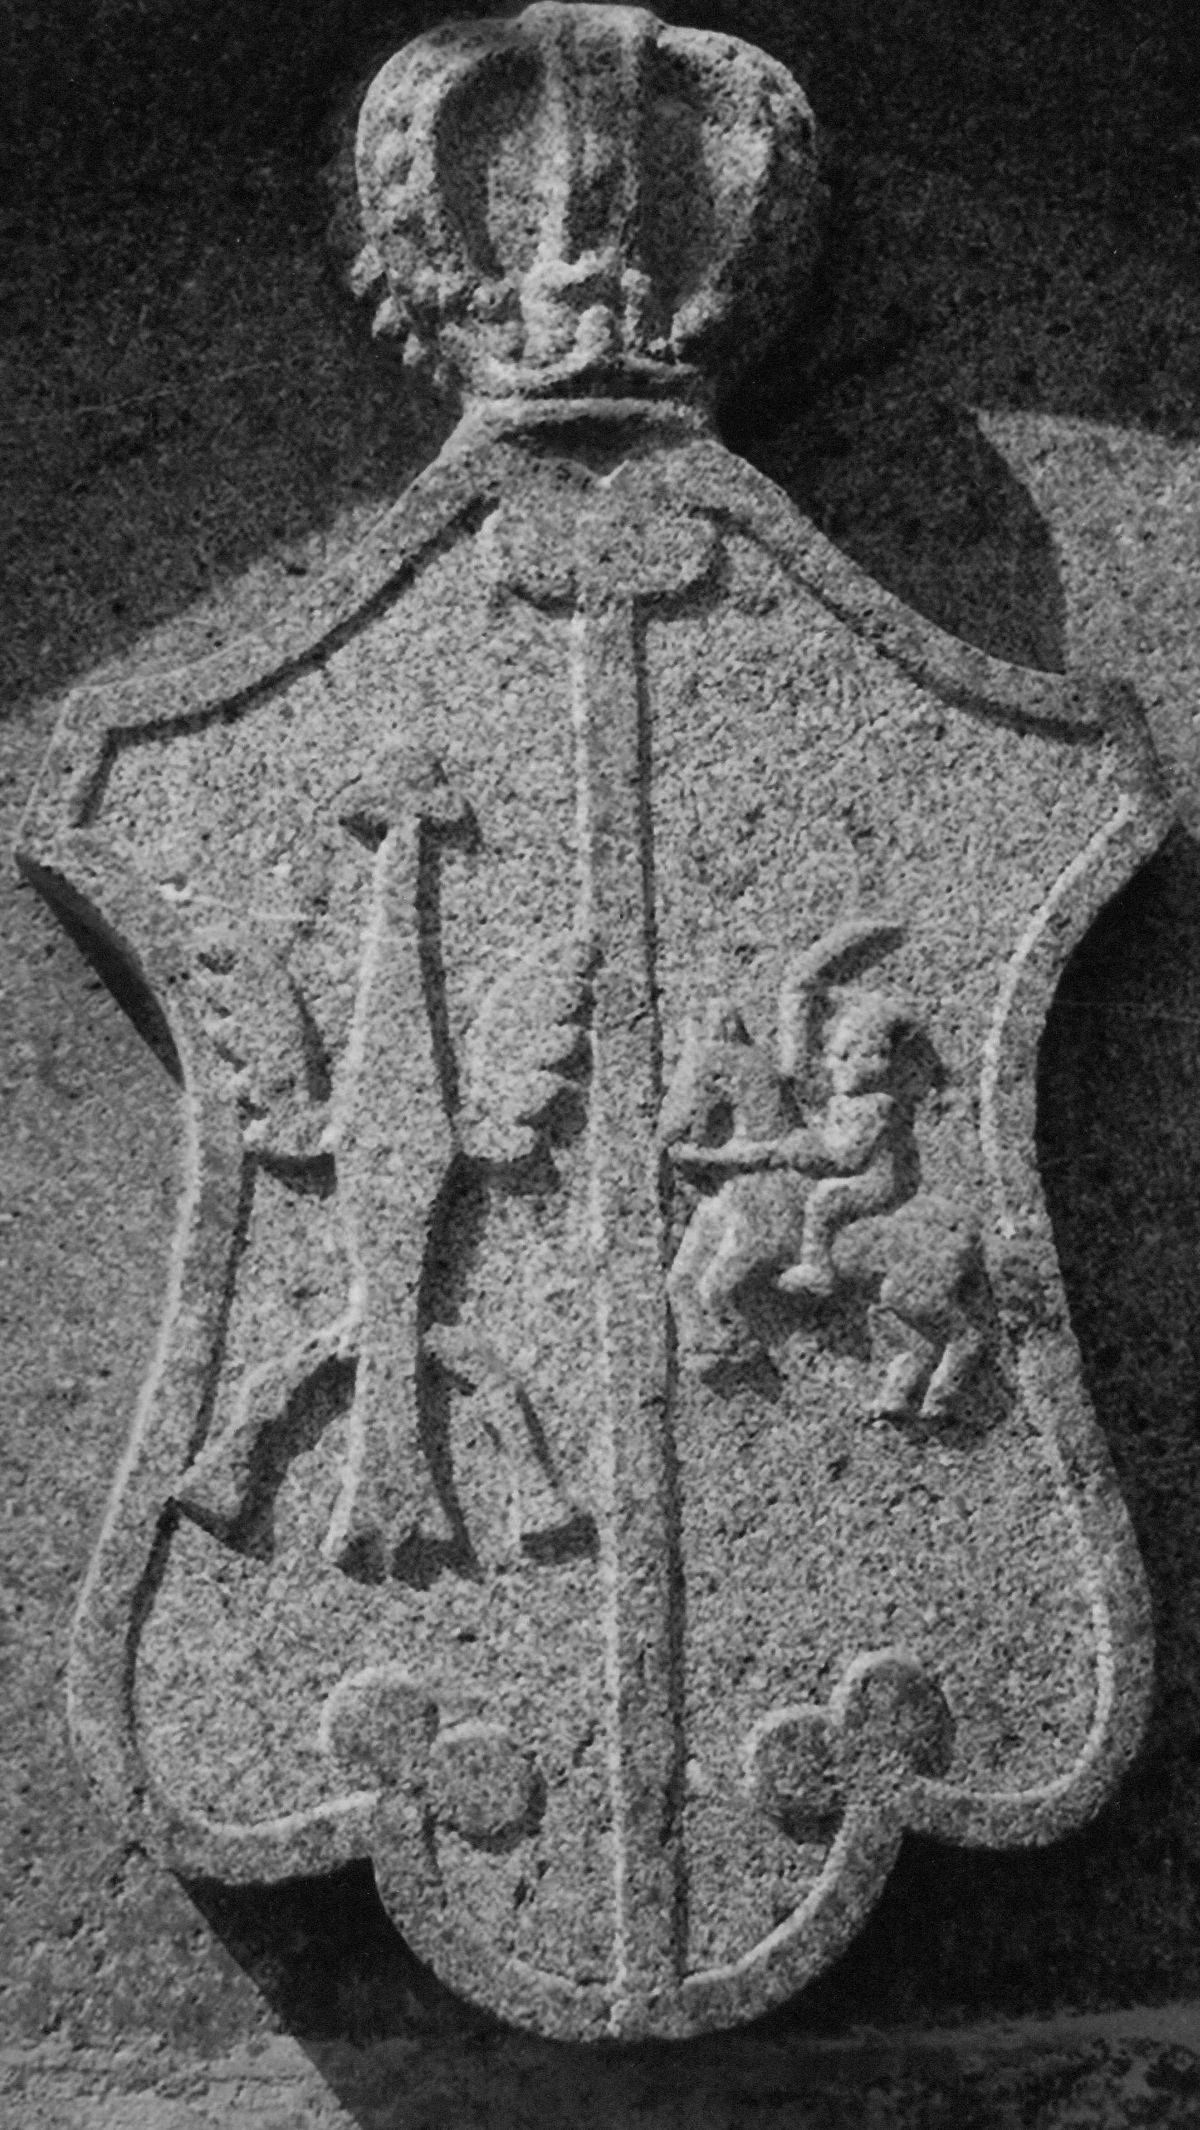 Ignatius Domeyko and his tombstone in Chile, detail, coat of arms cartouche